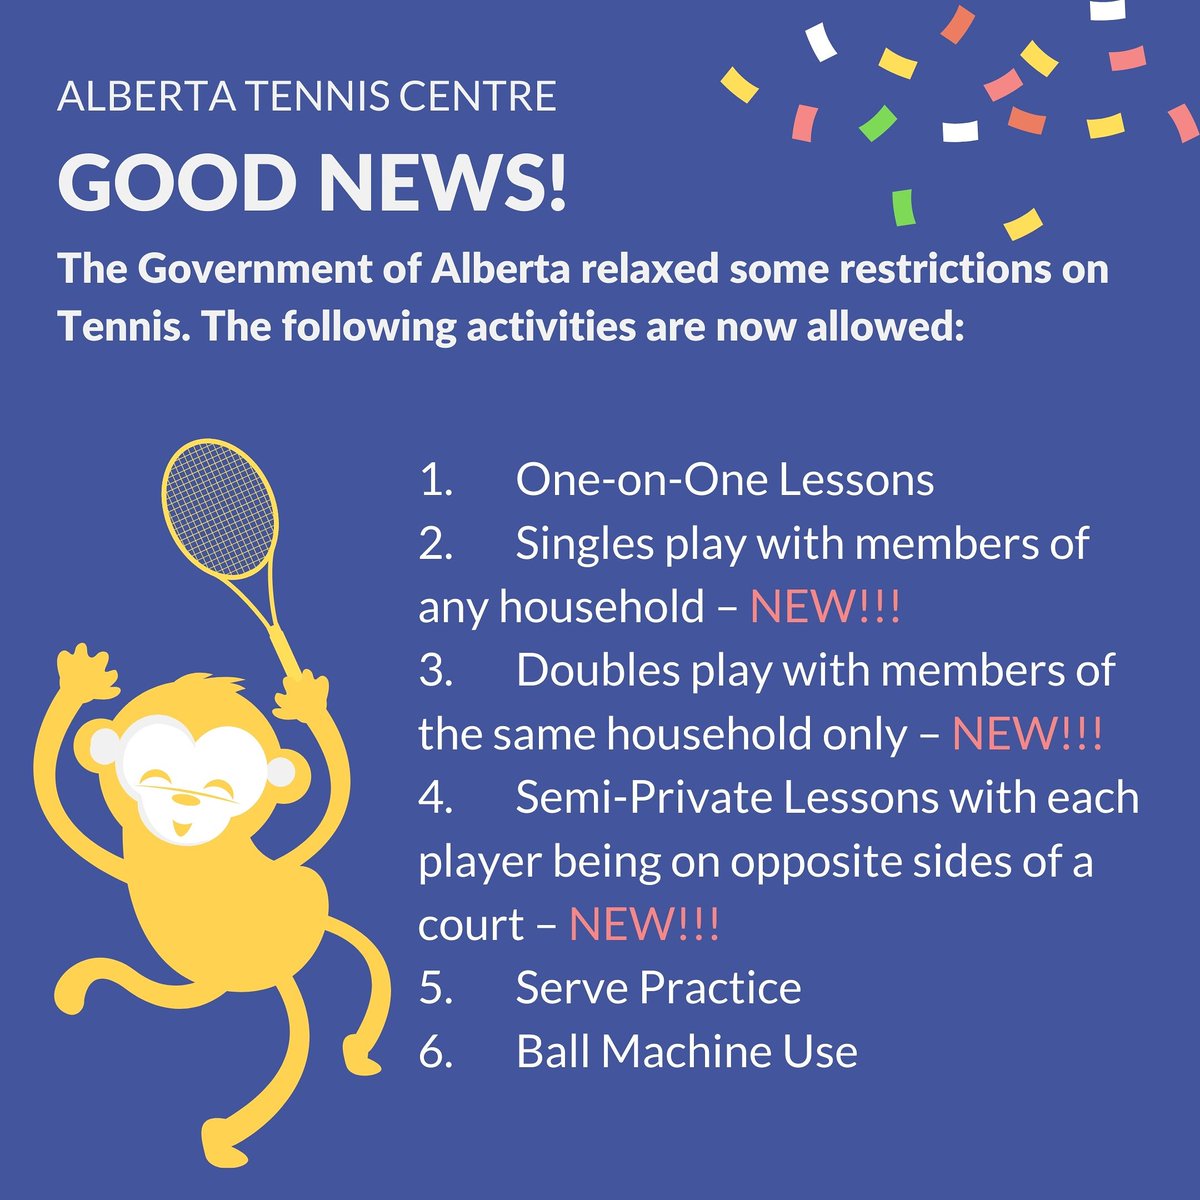 📢 GOOD NEWS! We got some words from the Government that we can open up singles for players from different household, and doubles within the same household 🎉
.
#ATCPROUD #atccares #goodnews #woohoo #tennis #yyctennis #calgarytennis #calgarysport